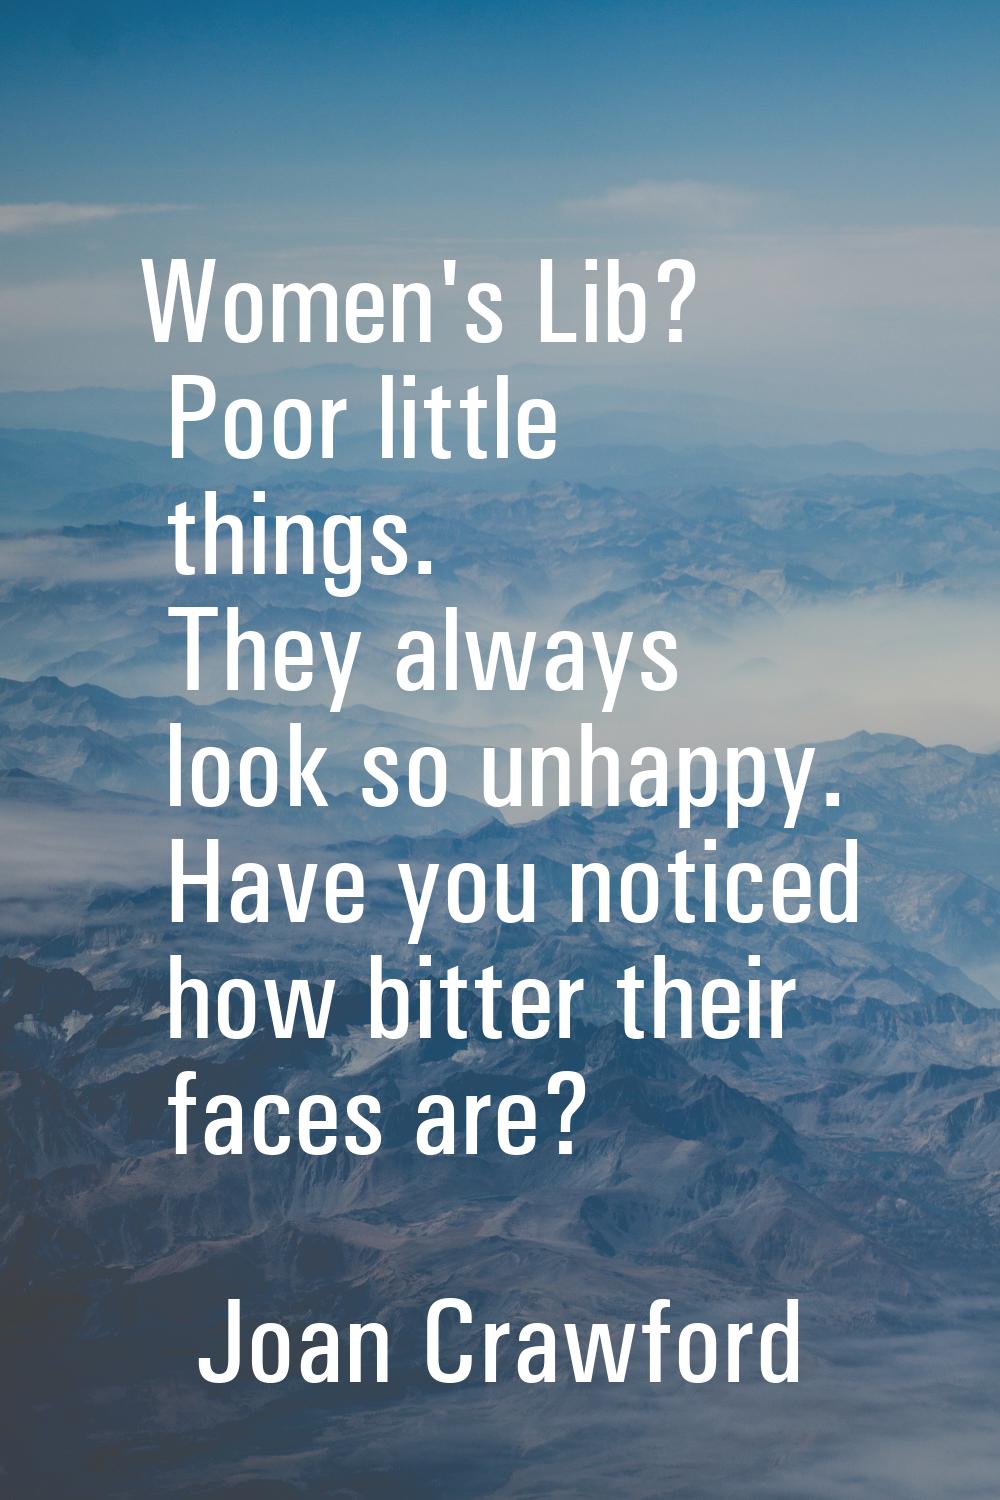 Women's Lib? Poor little things. They always look so unhappy. Have you noticed how bitter their fac